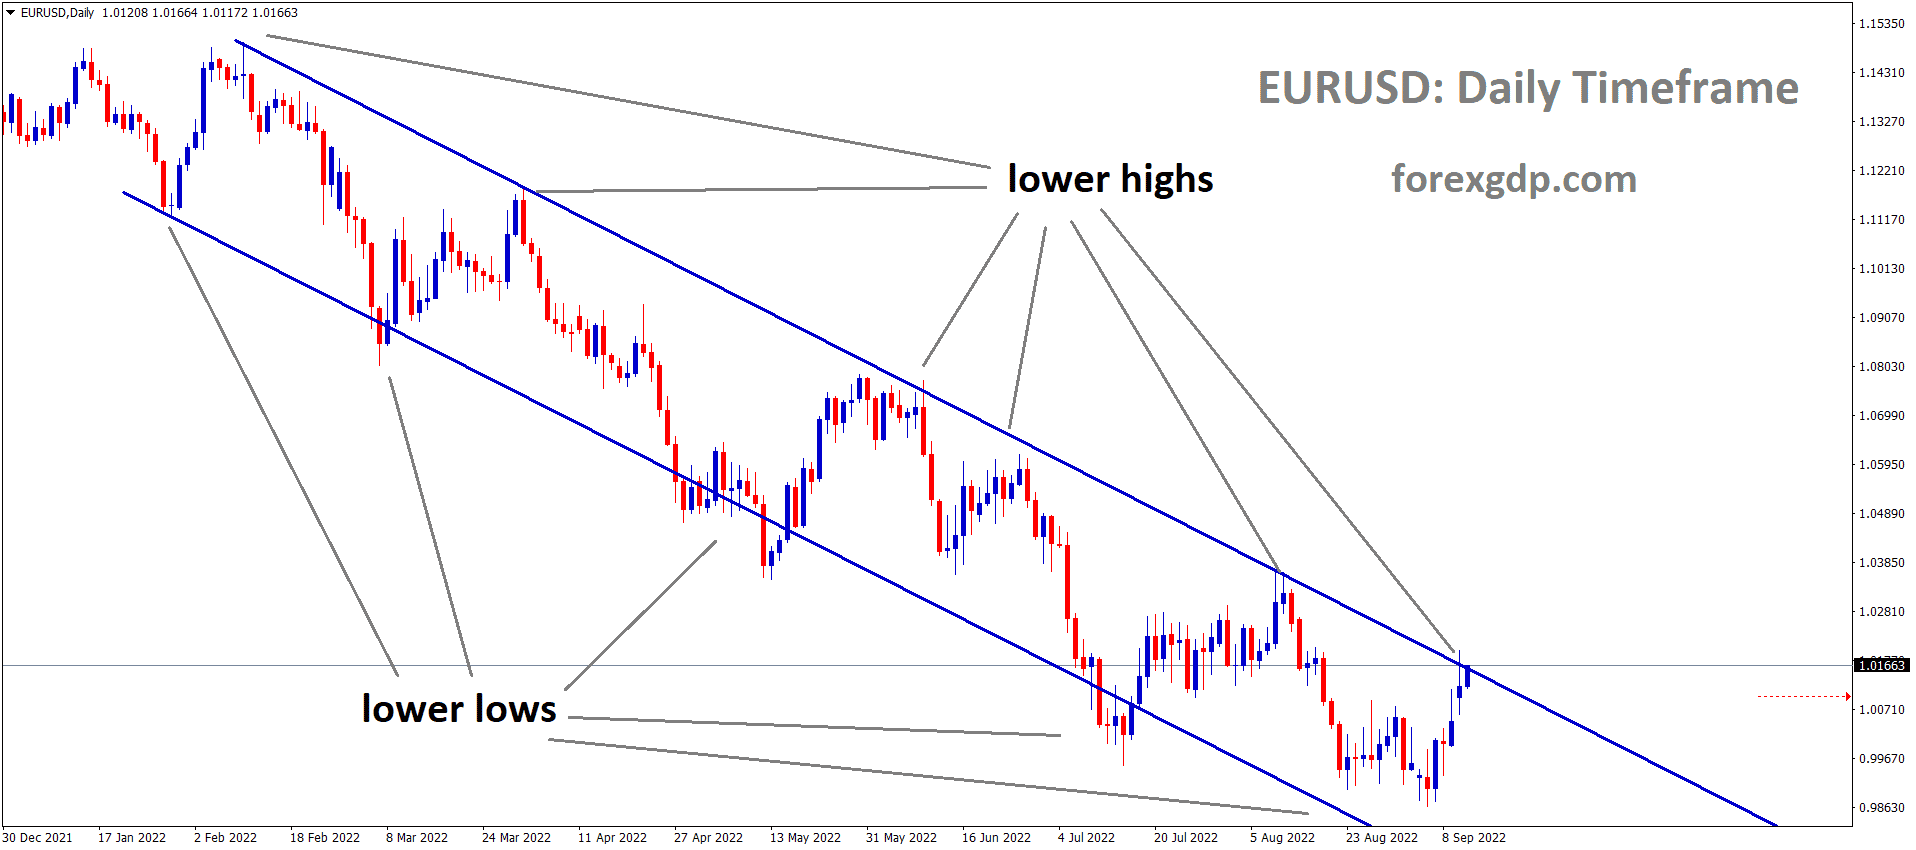 EURUSD is moving in the Descending channel and the market has reached the lower high area of the channel 1